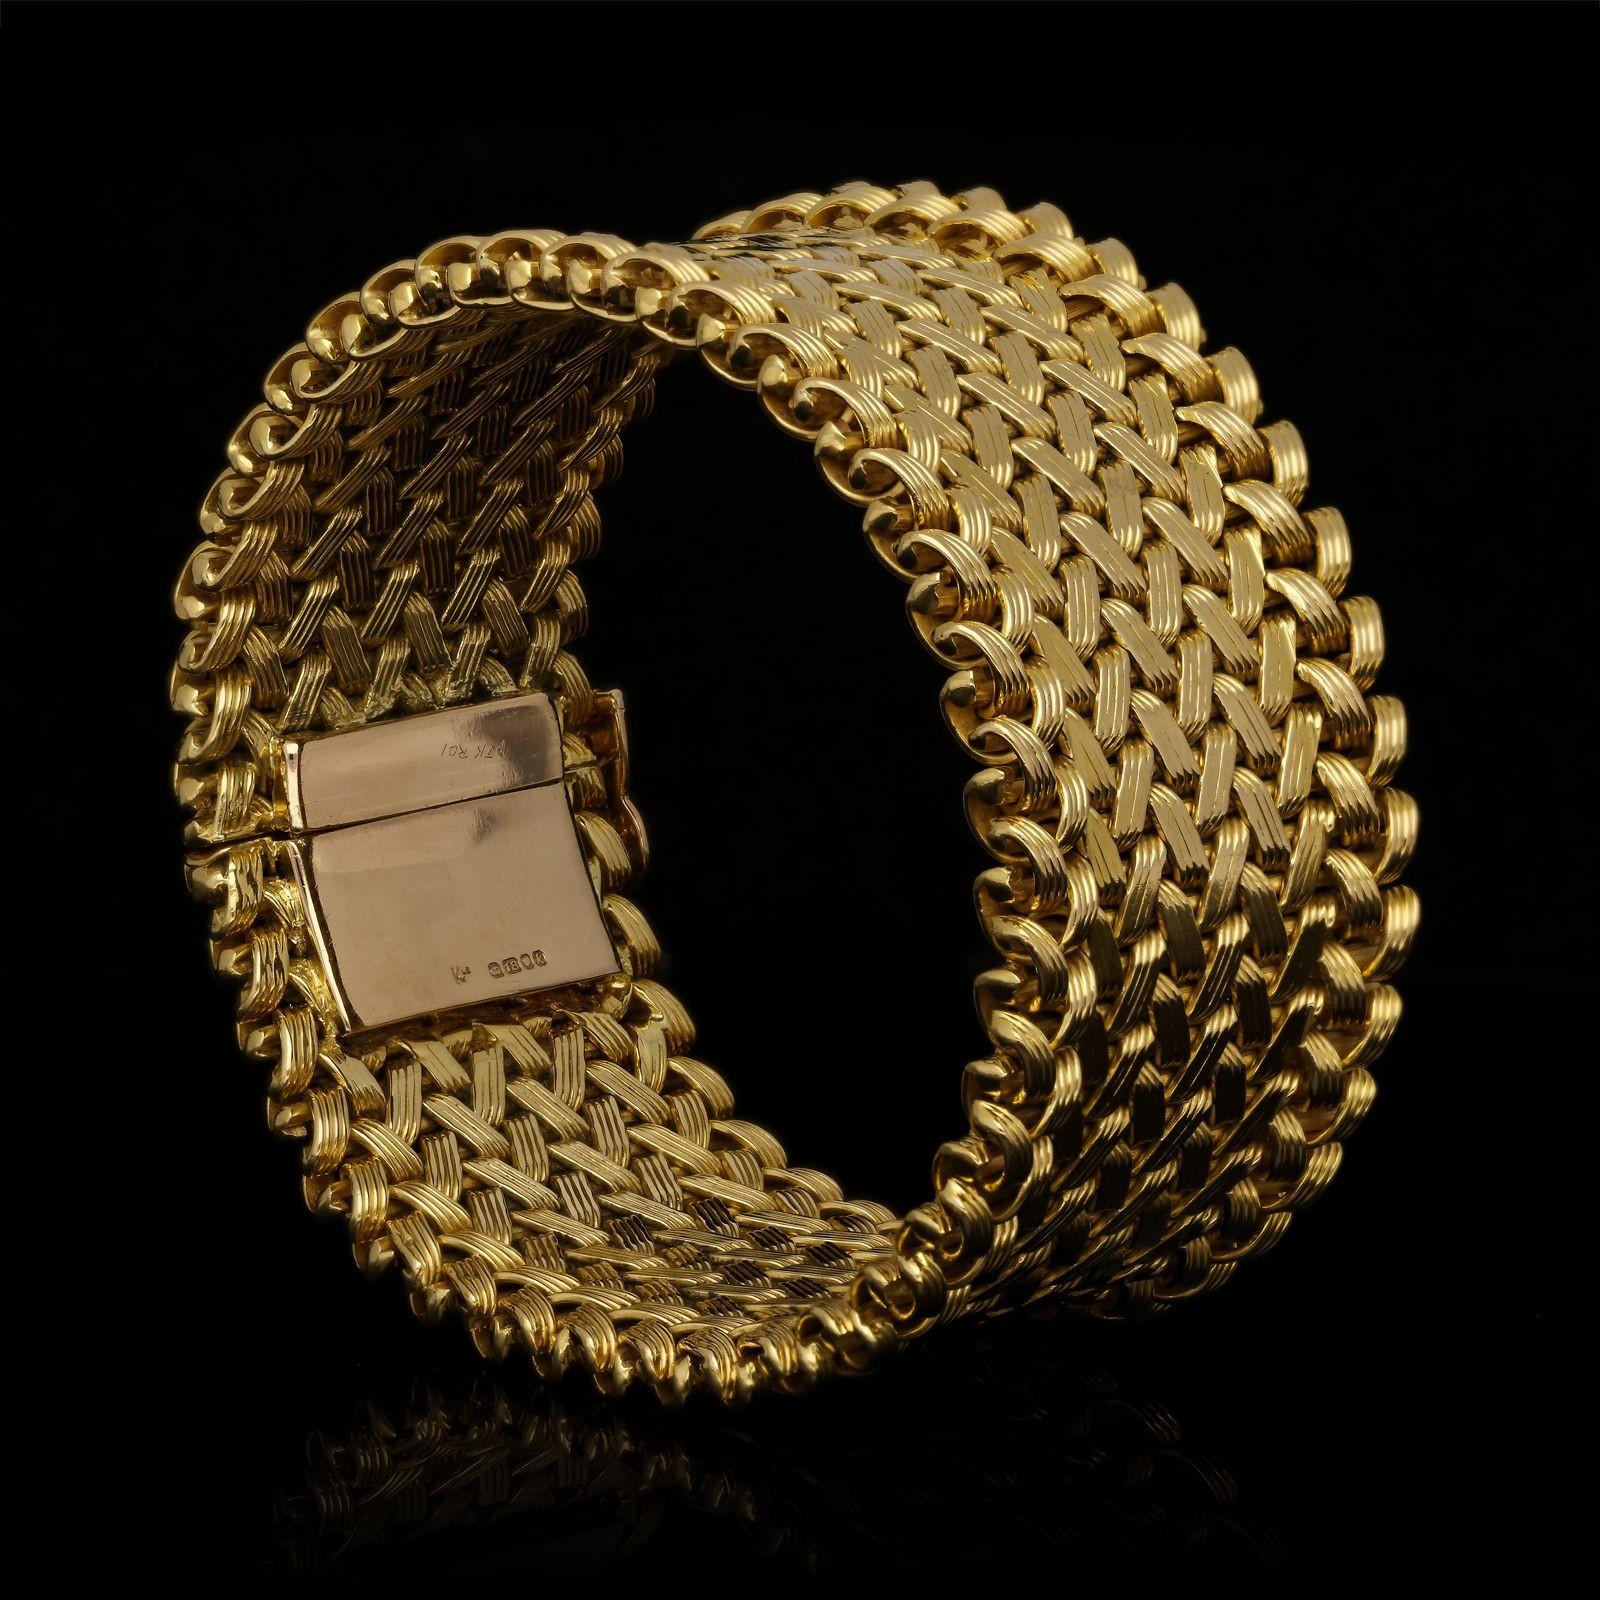 A stylish 18ct yellow gold bracelet by Kutchinsky 1966, the bracelet of wide strap design, formed of six rows of woven flattened gold strands in a repeating chevron pattern, edged with a double row of gold loops, to a concealed tongue and box clasp.